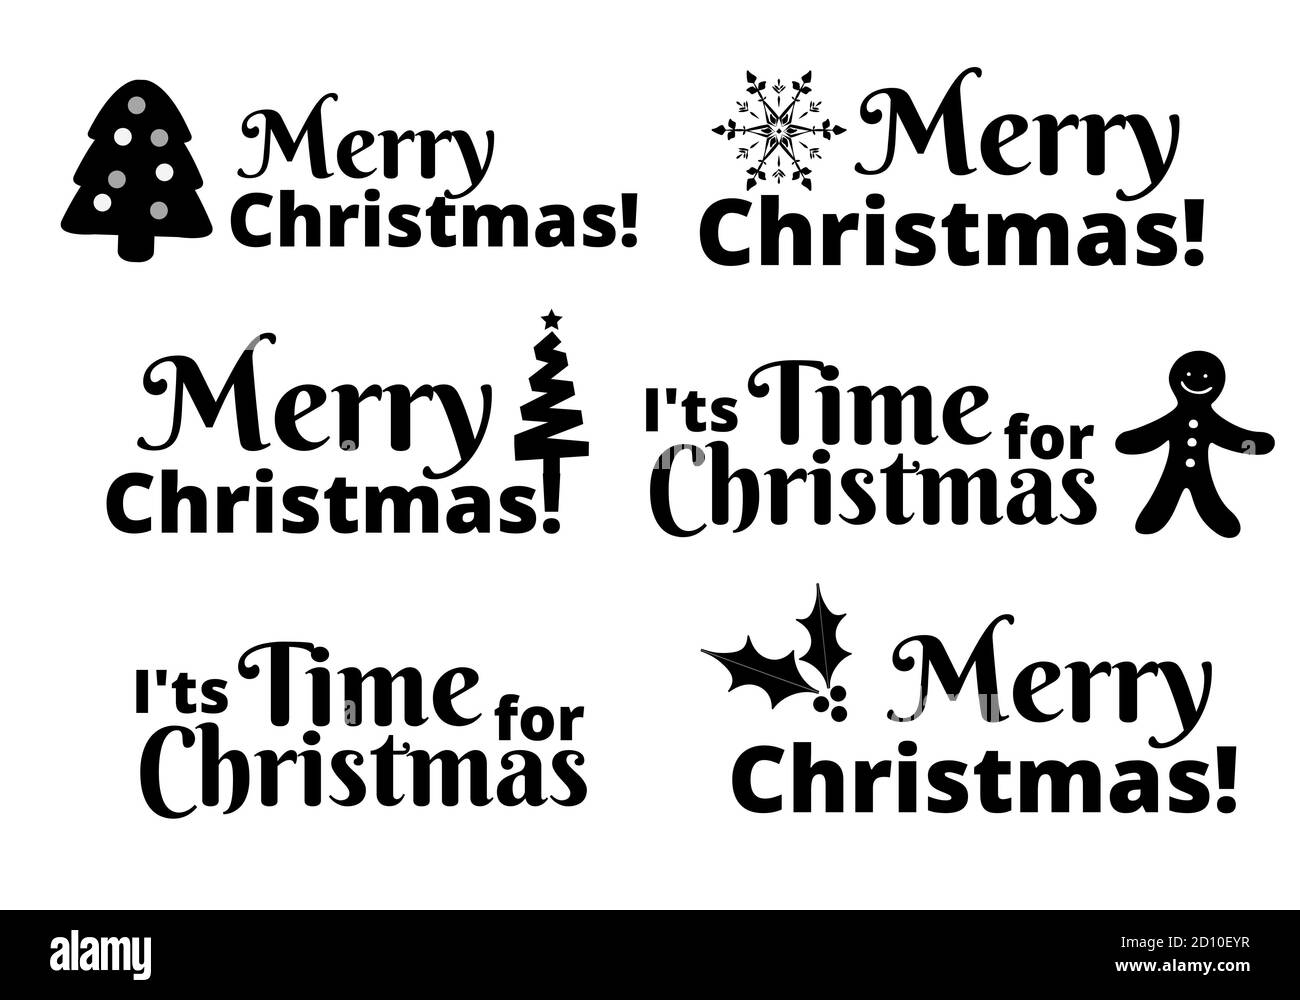 https://c8.alamy.com/comp/2D10EYR/black-and-white-merry-christmas-typography-collection-2D10EYR.jpg